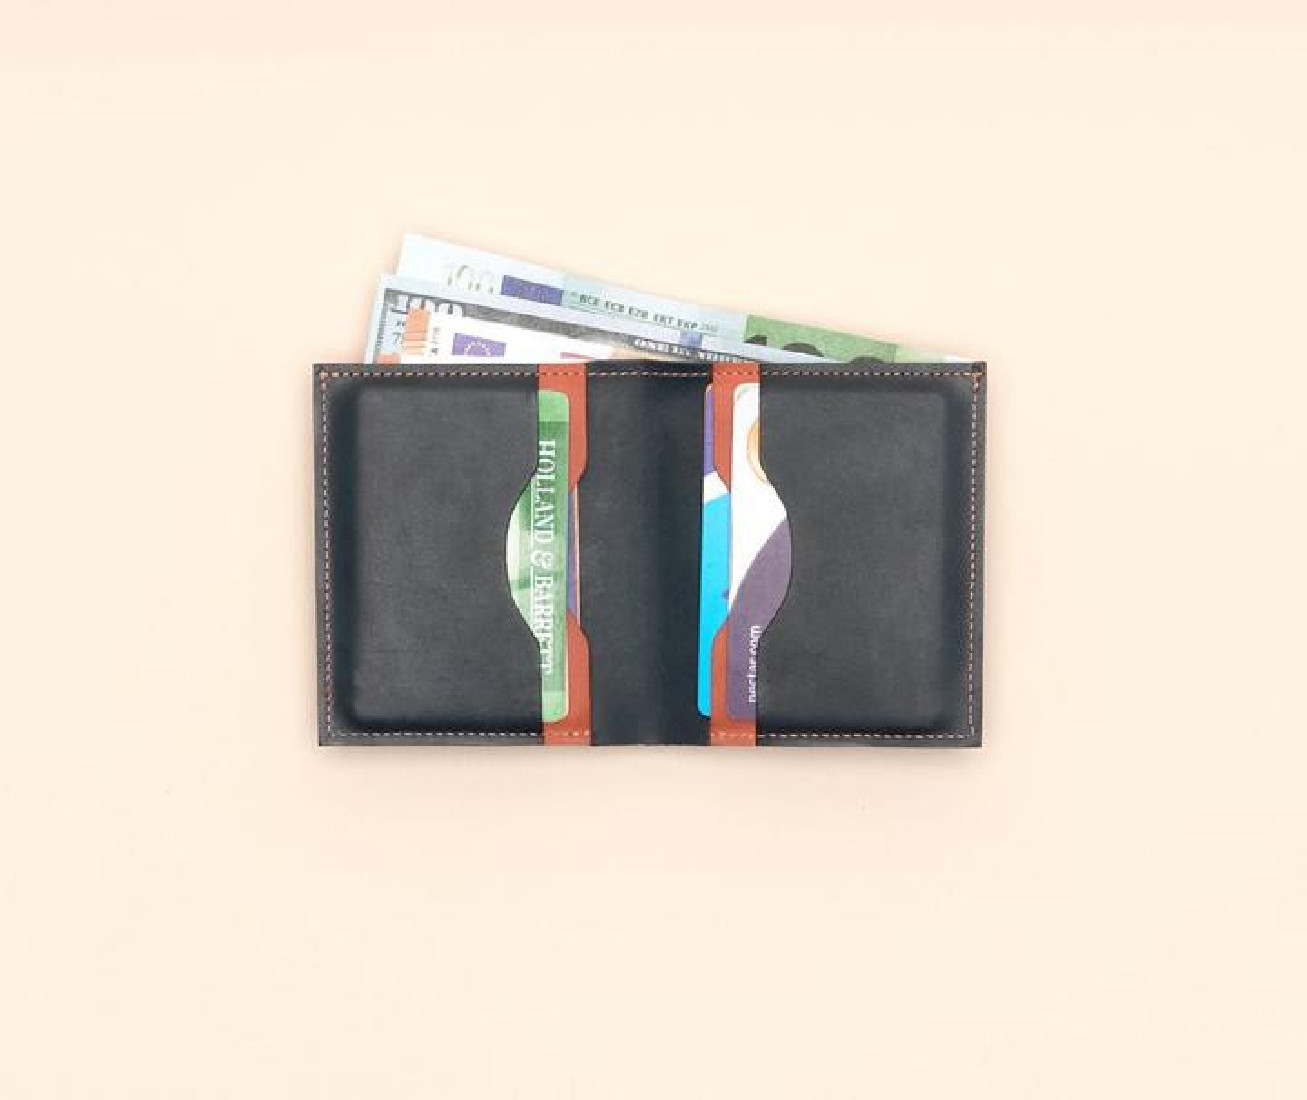 Paper Republic the square | leather wallet rustic rose & navy blue